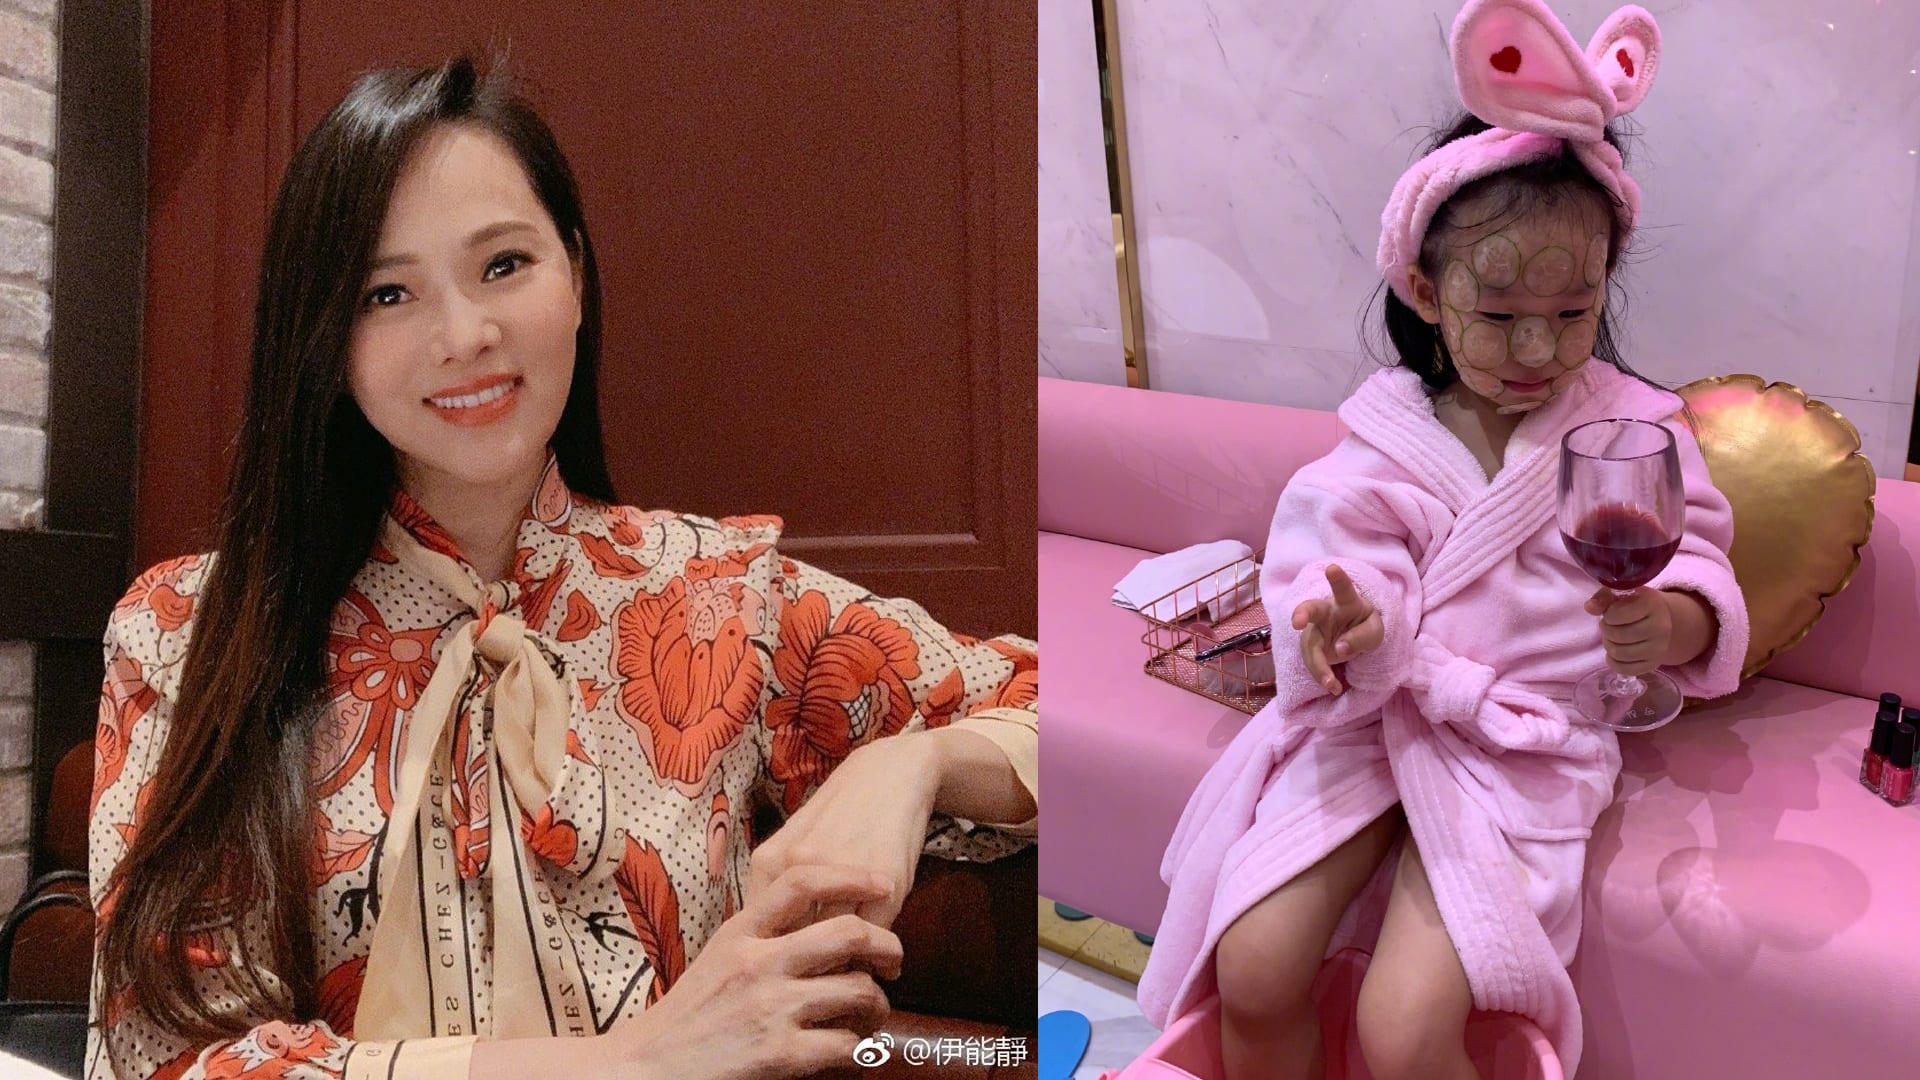 Annie Yi Takes Her “Busy” Three-Year-Old Daughter To The Spa To De-stress